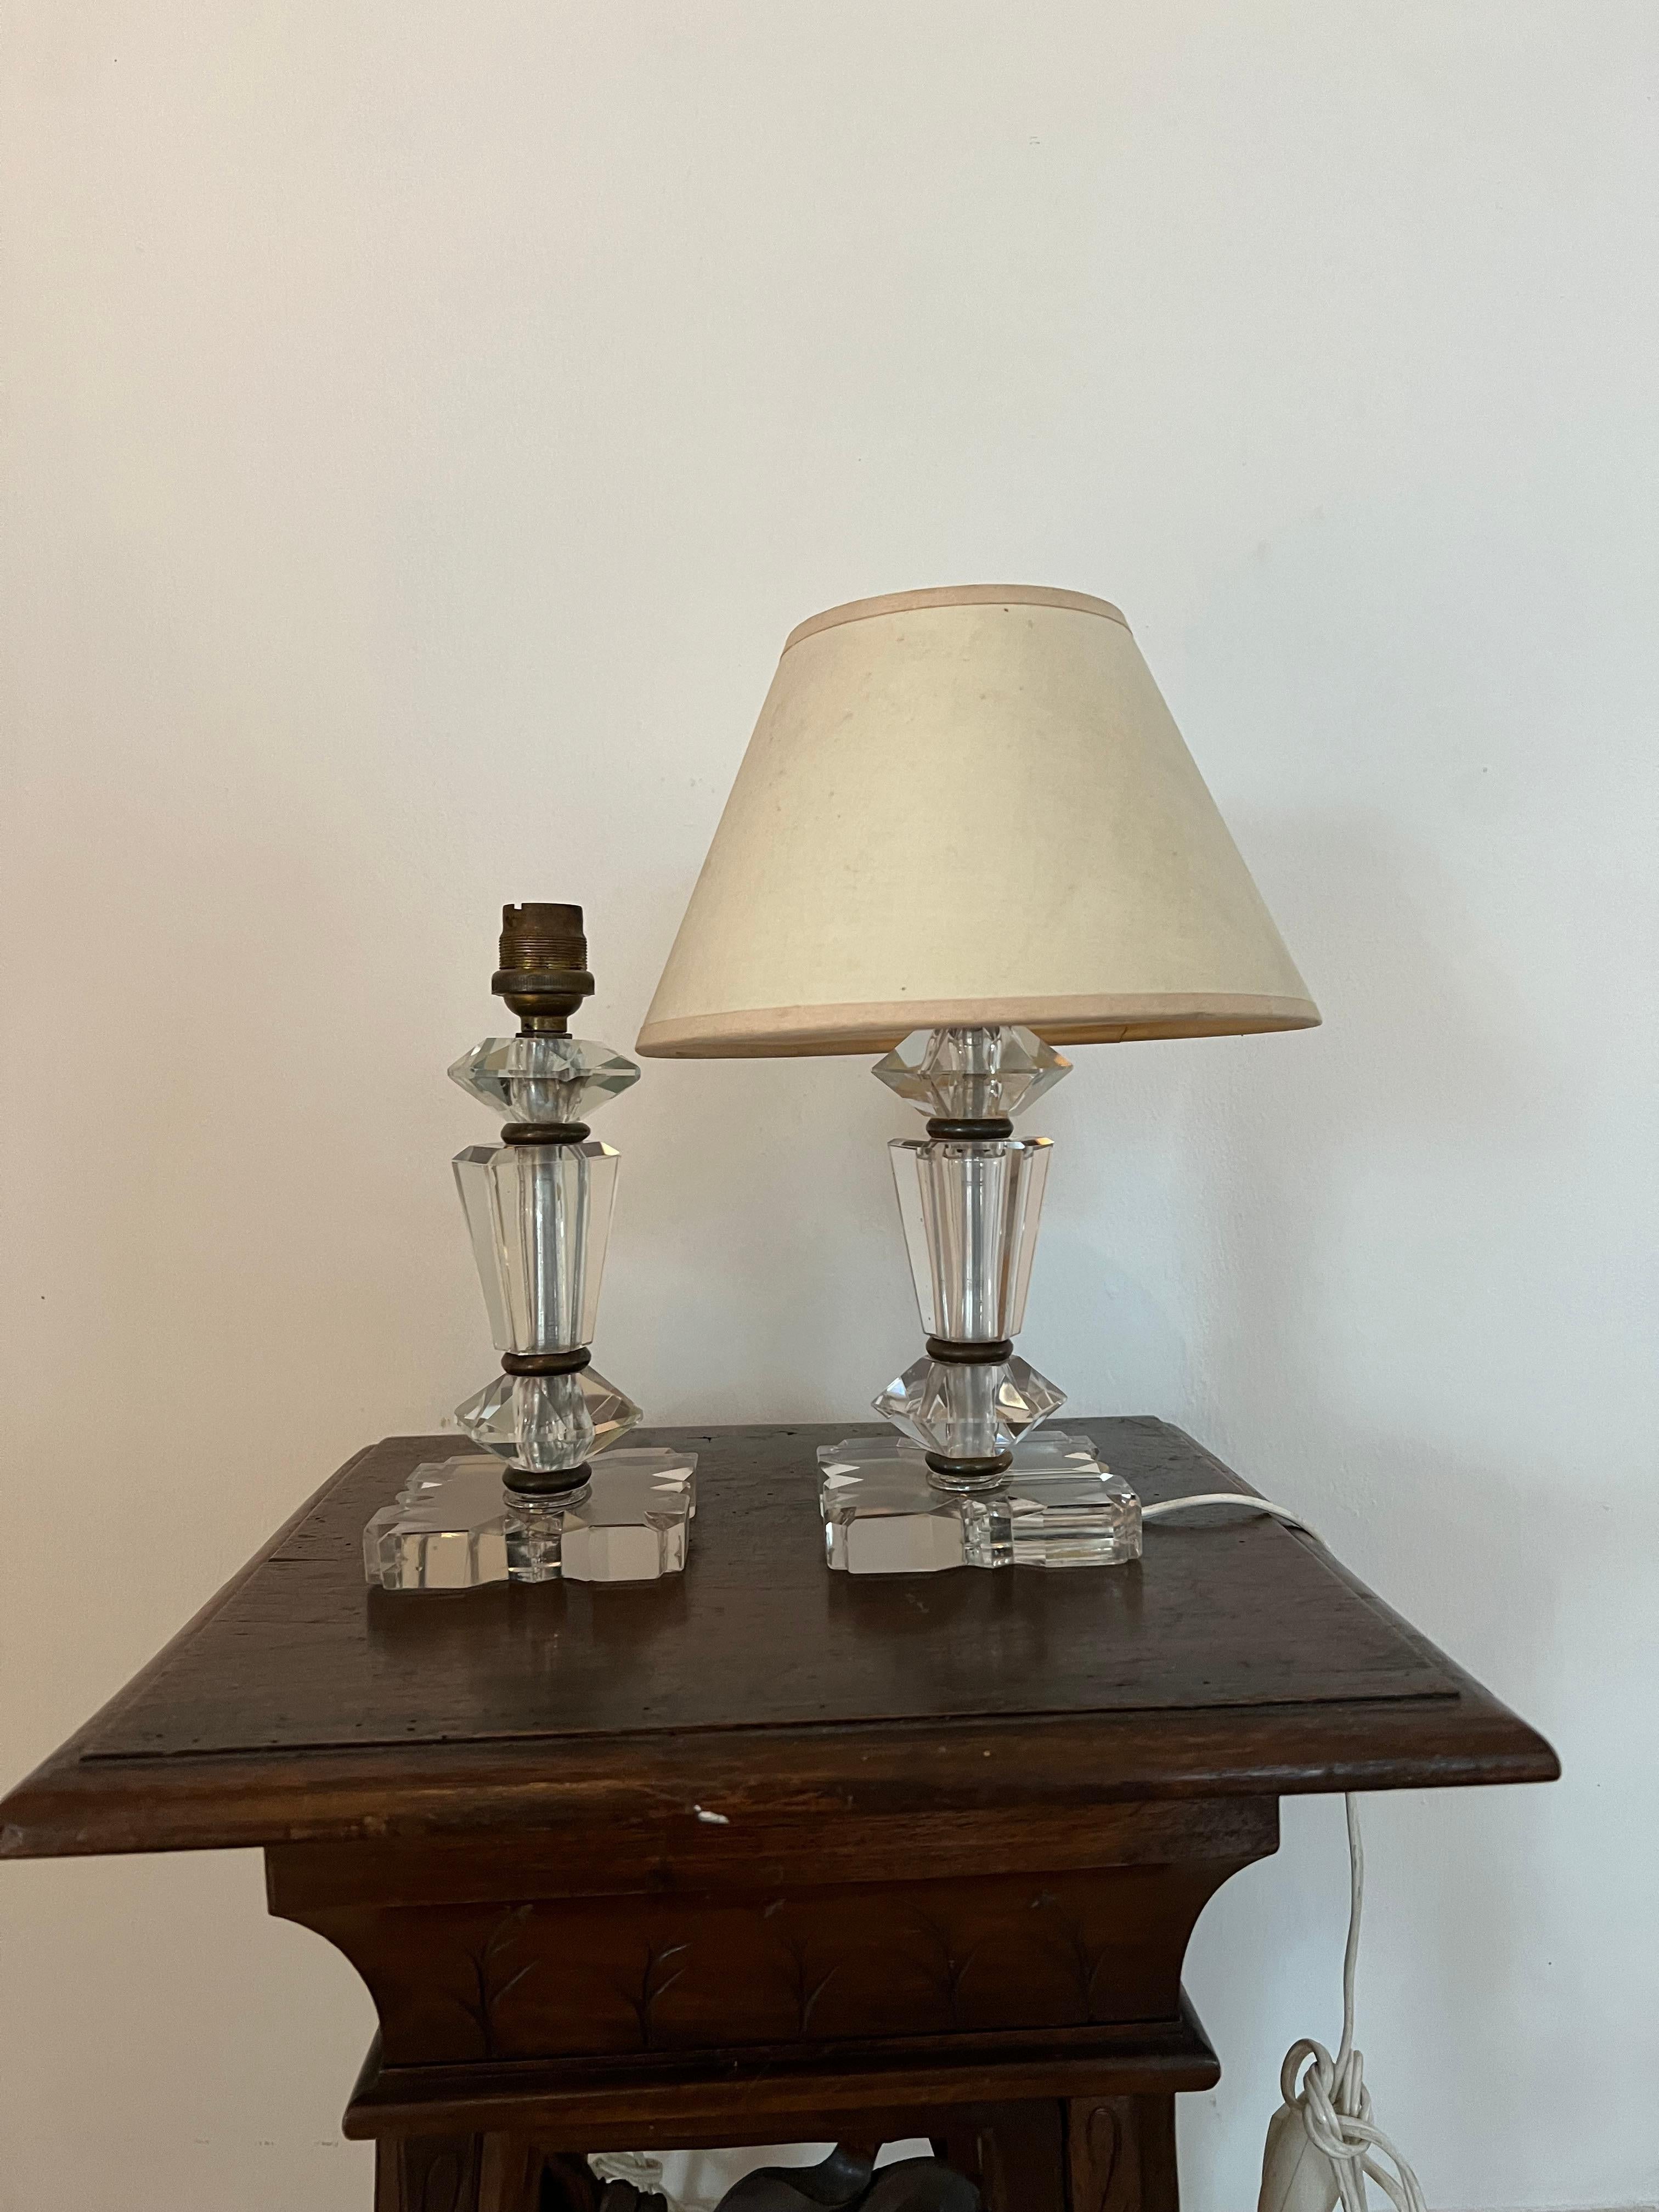 Beautiful pair of table lamps in the style of Baccarat and Jacques Adnet but they are not marked.
Manufactured in hand cut lead glass.
France circa 1940.
The pieces 